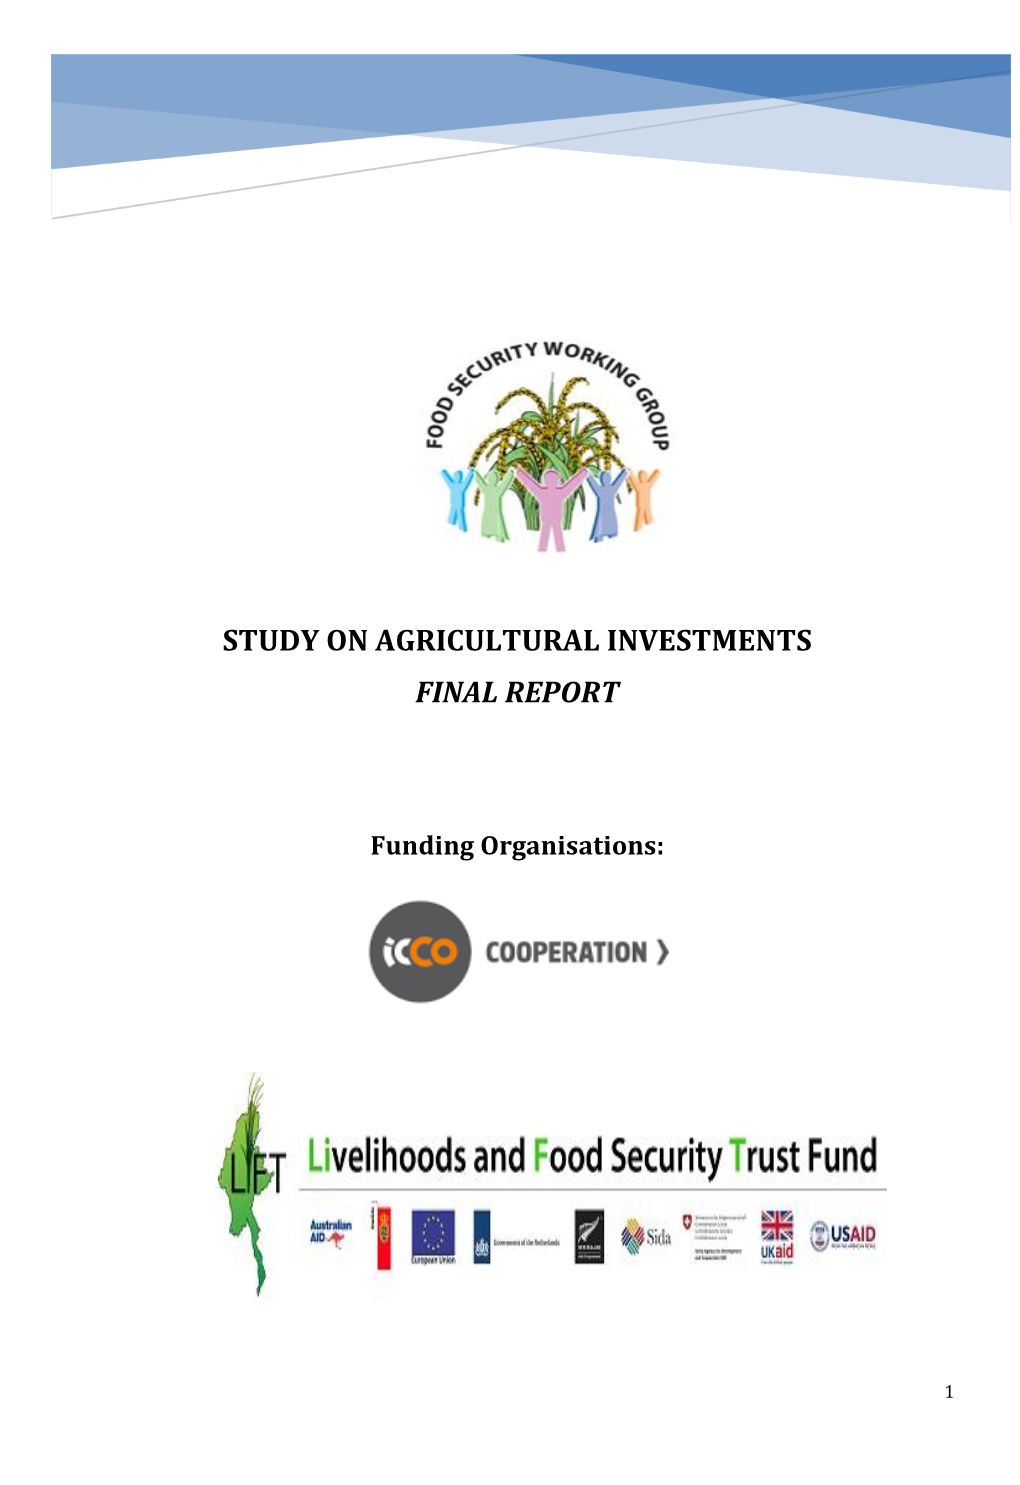 Study on Agricultural Investments Final Report